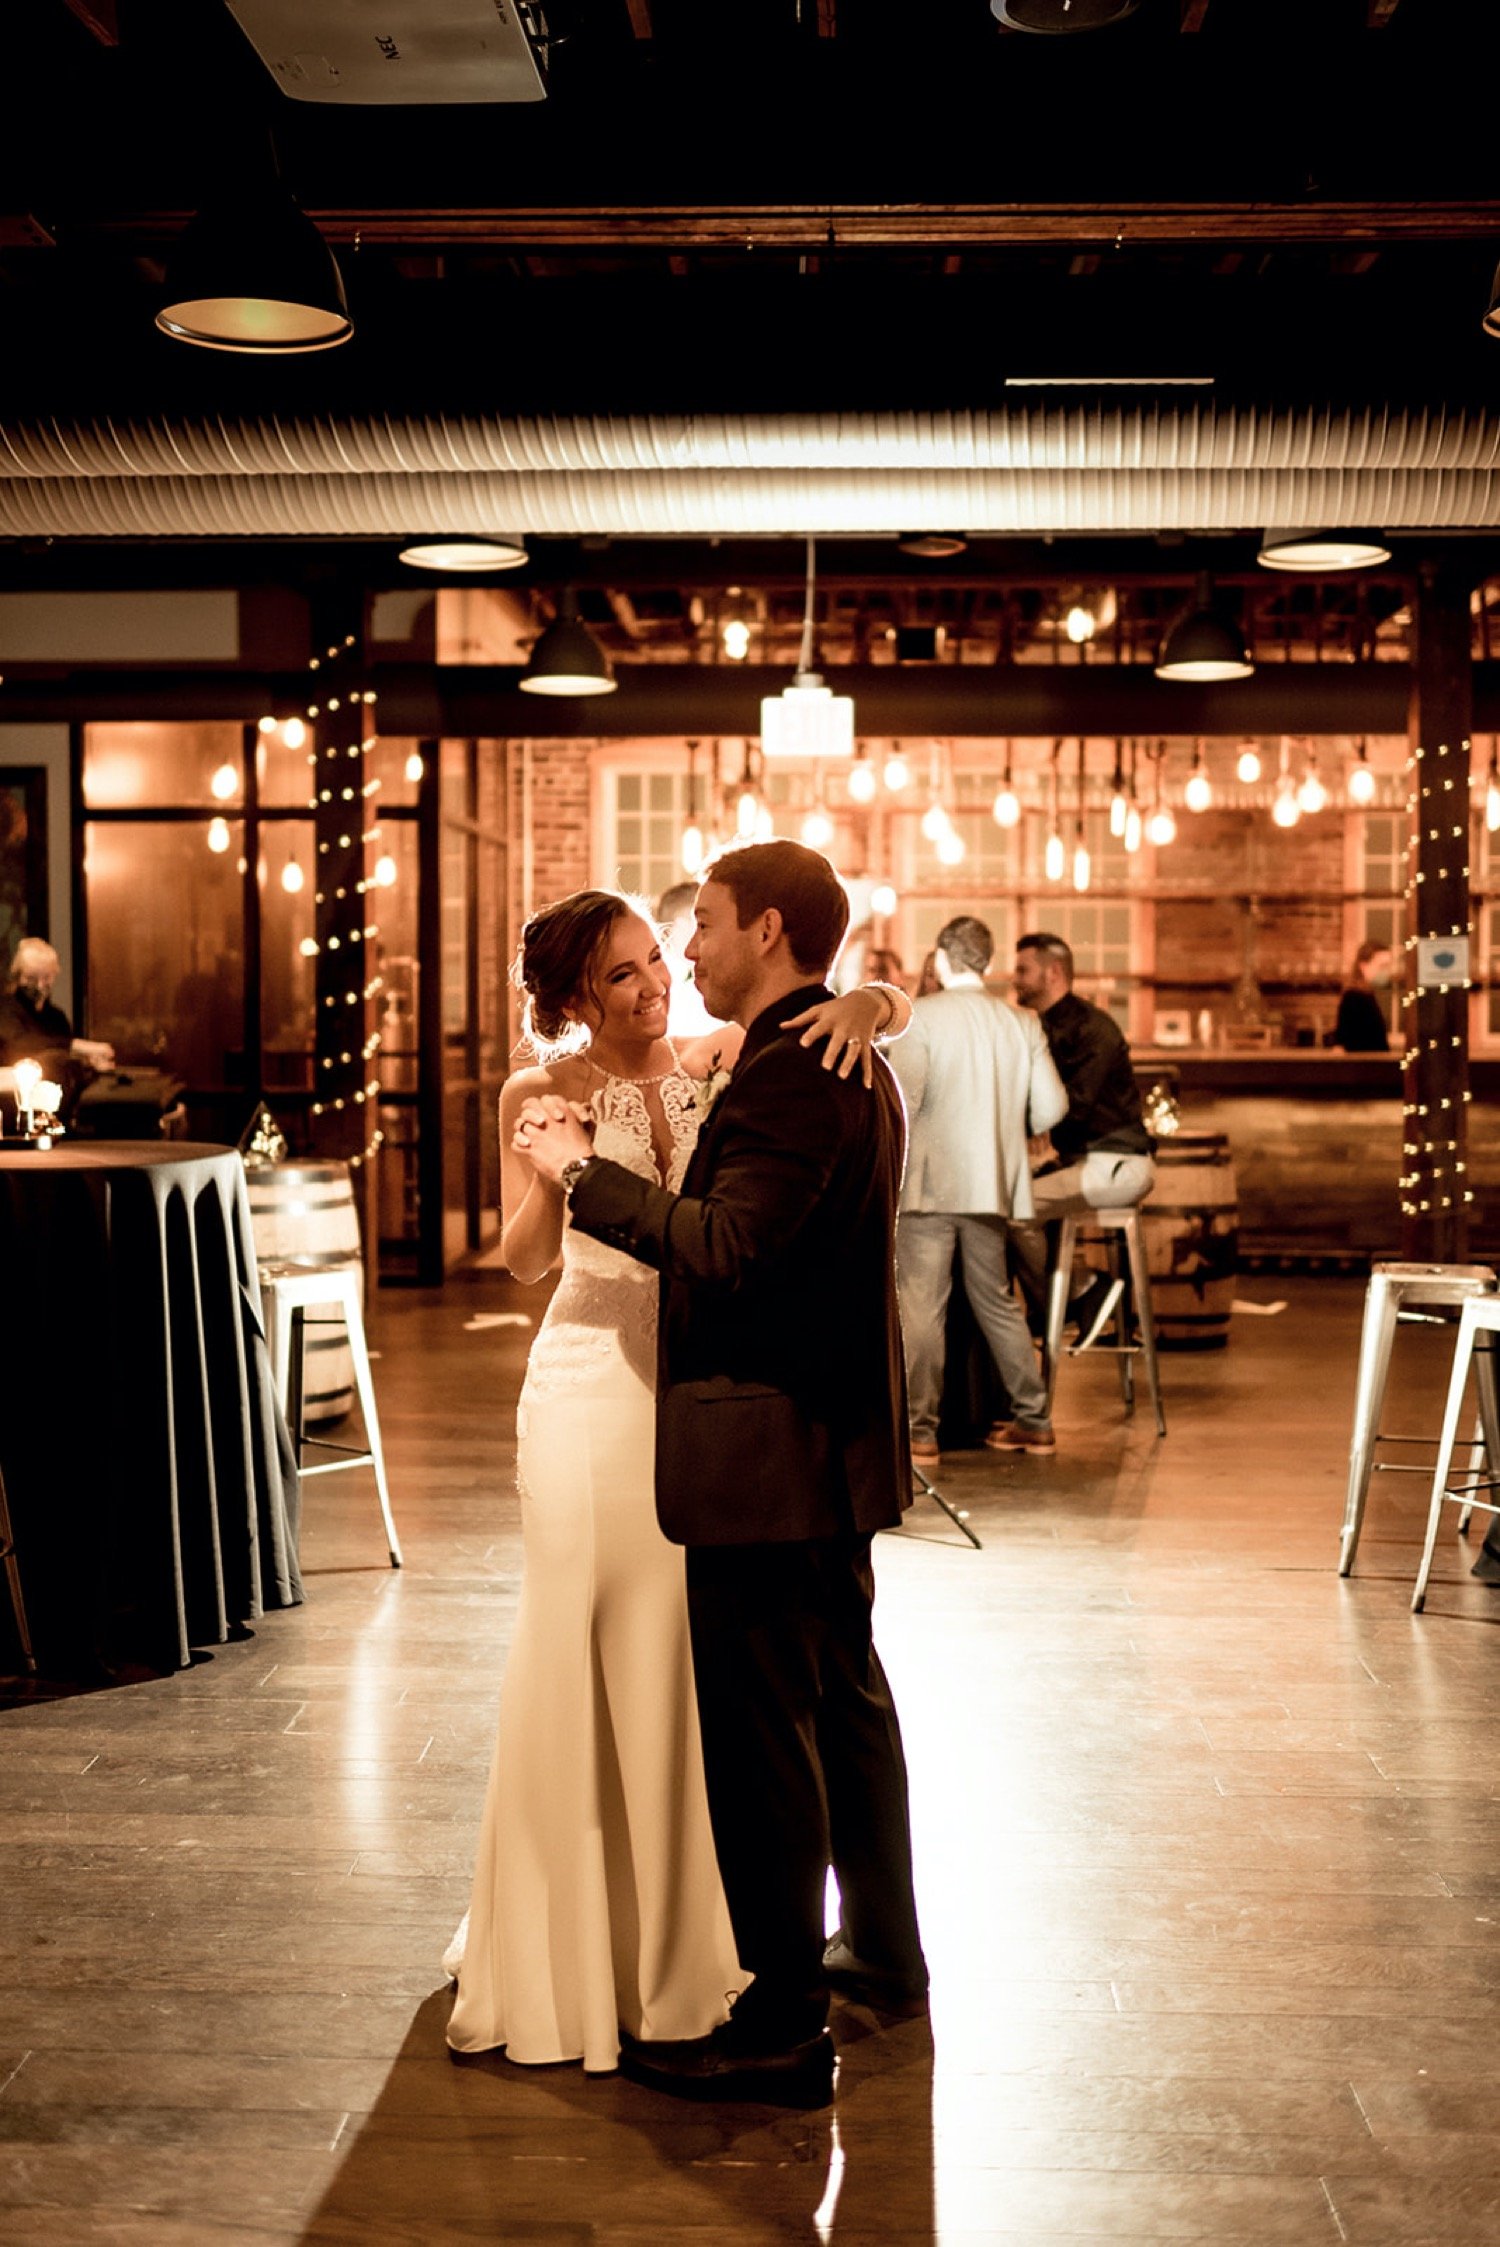 First-dance-Indianapolis-tinker-house.jpg.jpg